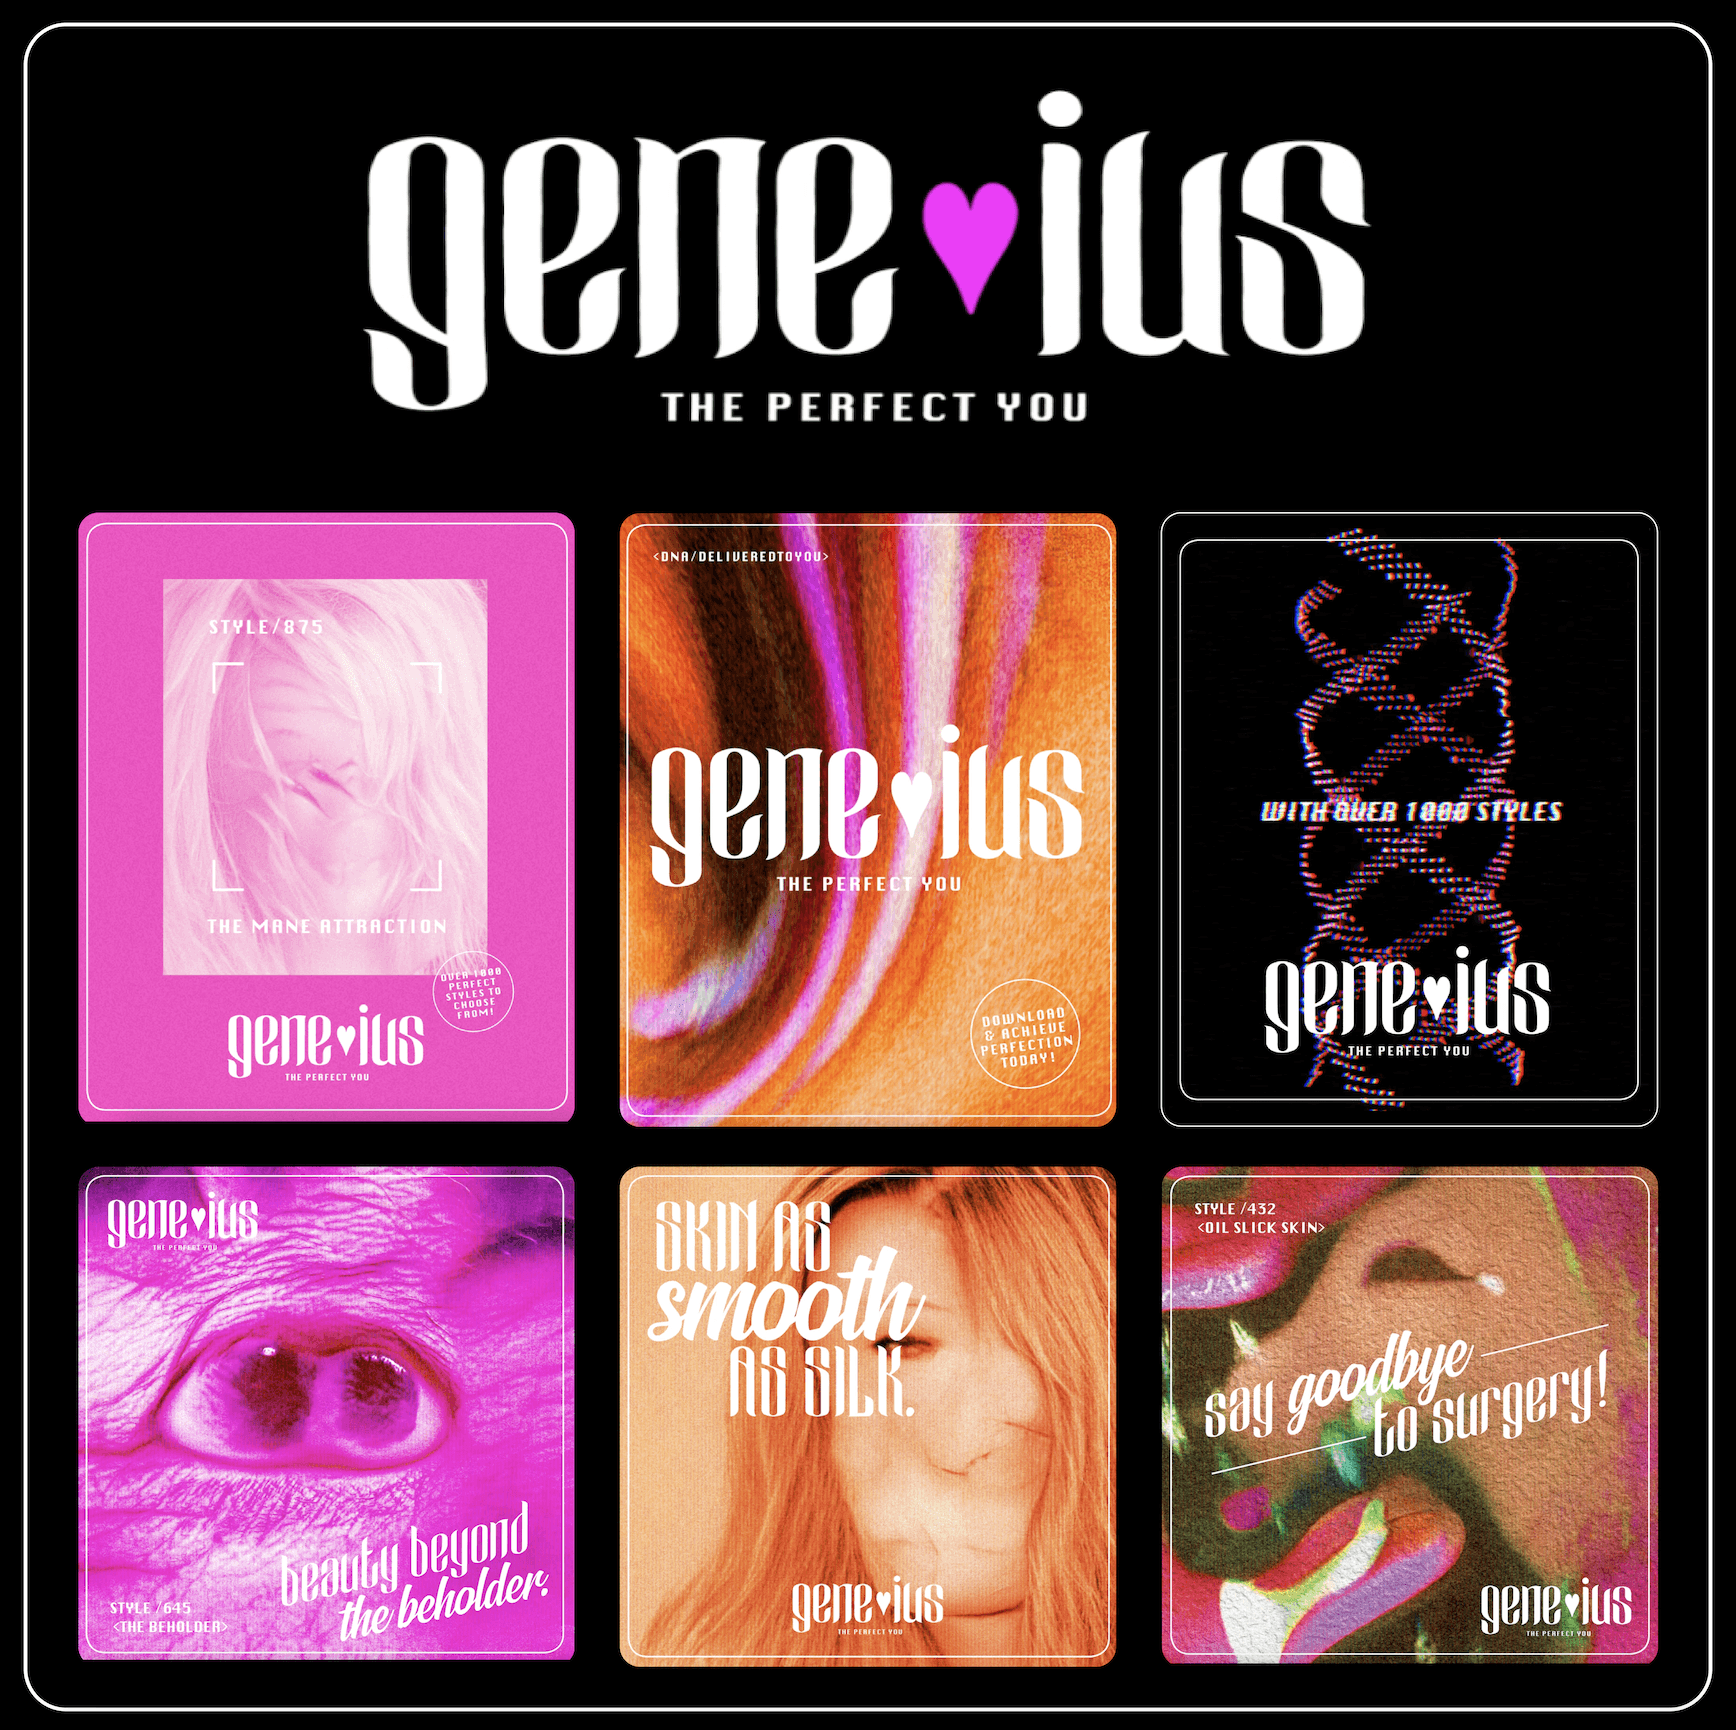 GENEIUS -  A fictional app that allows you to genetically modify your appearance to ‘perfection’ by erasing the hands of time to achieve eternal youth. However the app, is set in a dystopian society where beauty trends have progressed past the desire for ‘symmetry’ and have developed to something far more sinister.